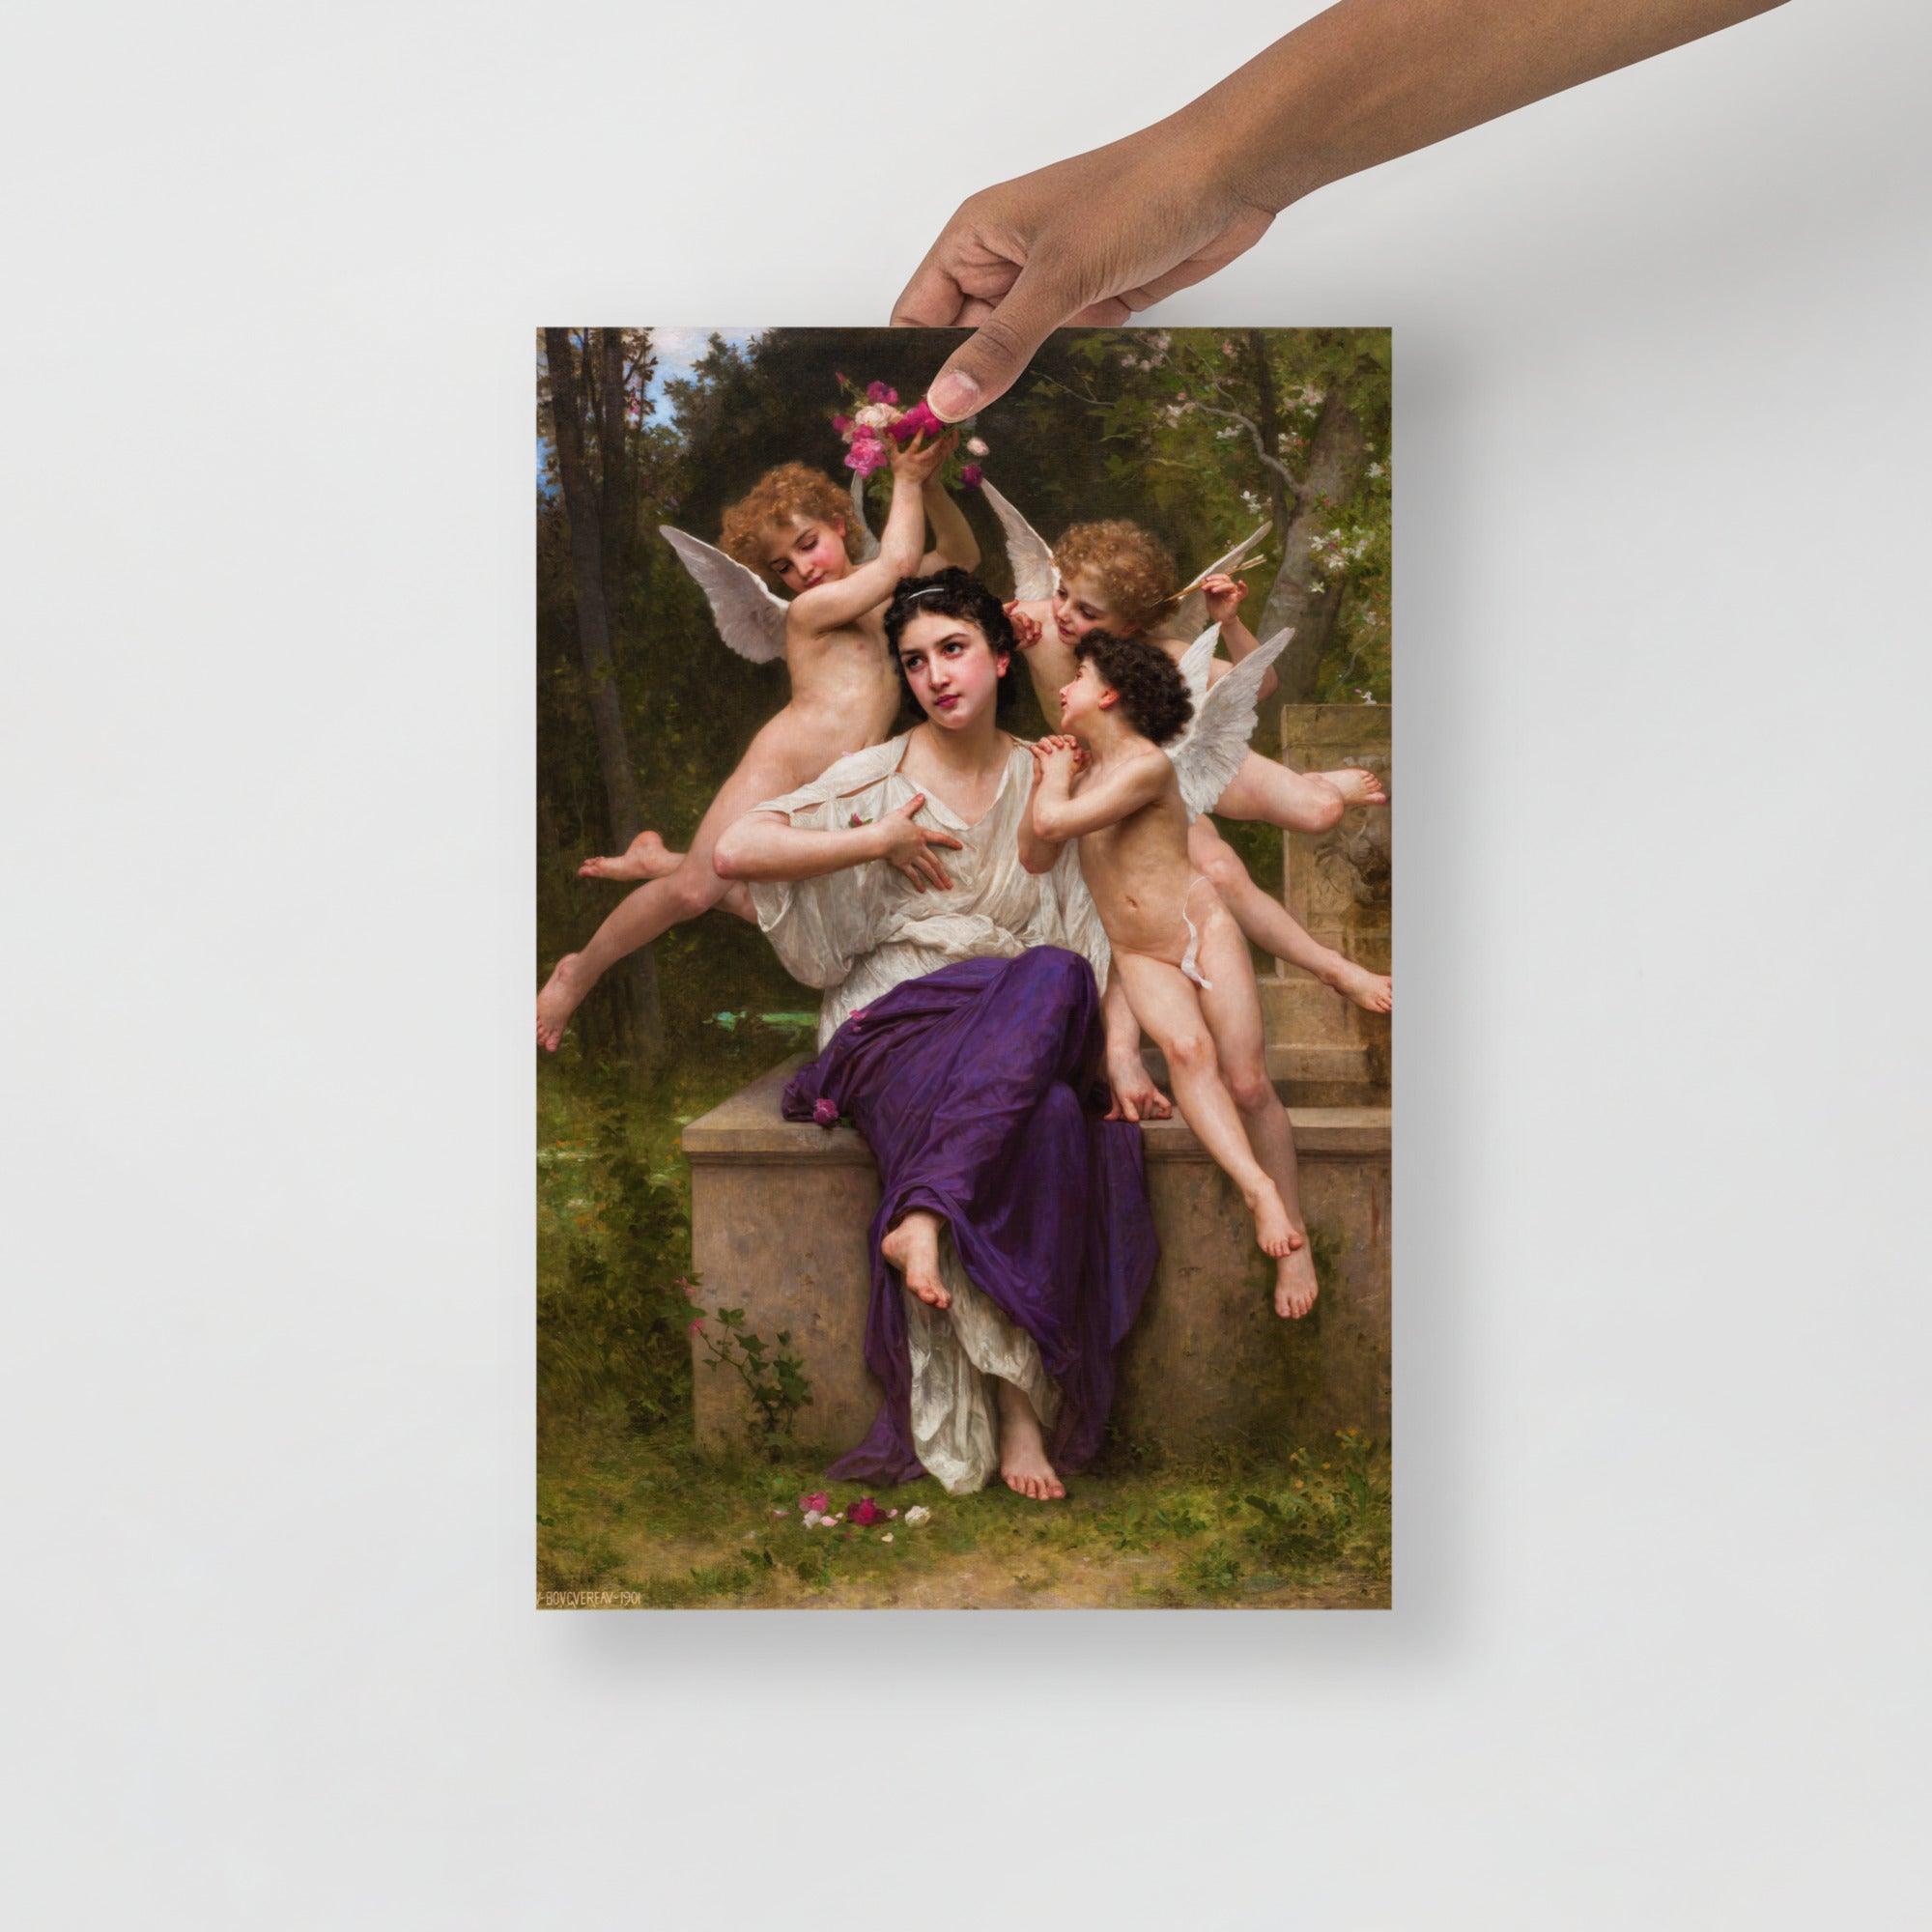 A Dream Of Spring by William Adolphe Bouguereau poster on a plain backdrop in size 12x18”.